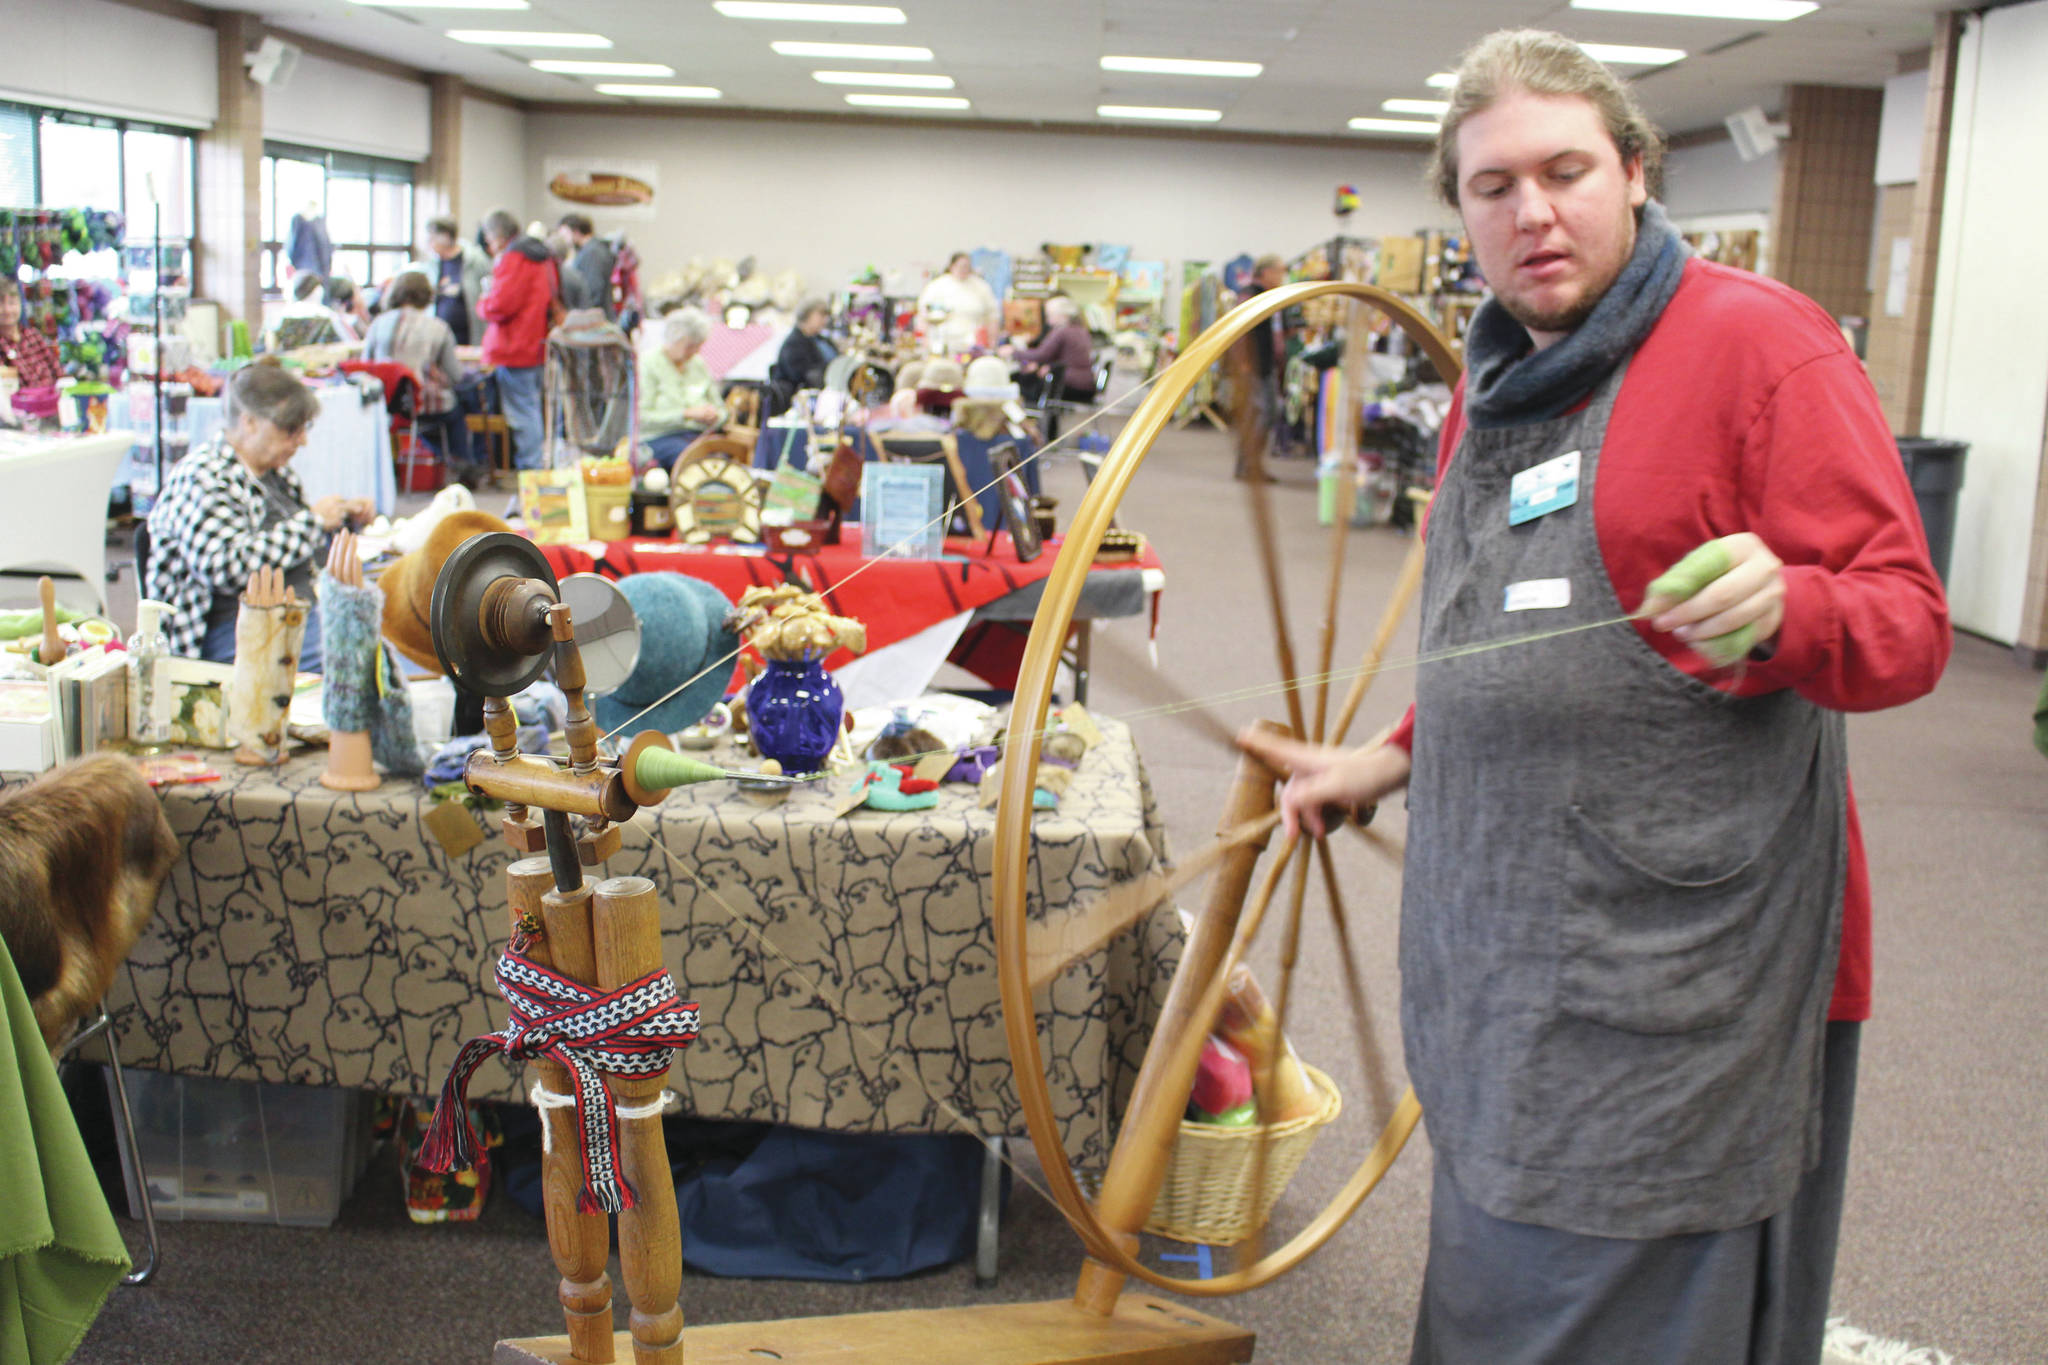 Cole Harmon shows off his great wheel – also known as a muckle wheel – during the Fireweed FiberFest at the Soldotna Regional Sports Complex on Sept. 28, 2019. Harmon spins with qiviut, which is the inner wool of the musk ox and is harvested by Alaska Native elders in Nome. Harmon discovered recently that his wheel was built in the 1750s out of salvaged shipwreck wood by Quakers on the east coast. The wood itself is about 900 years old and was originally harvested in Scotland.